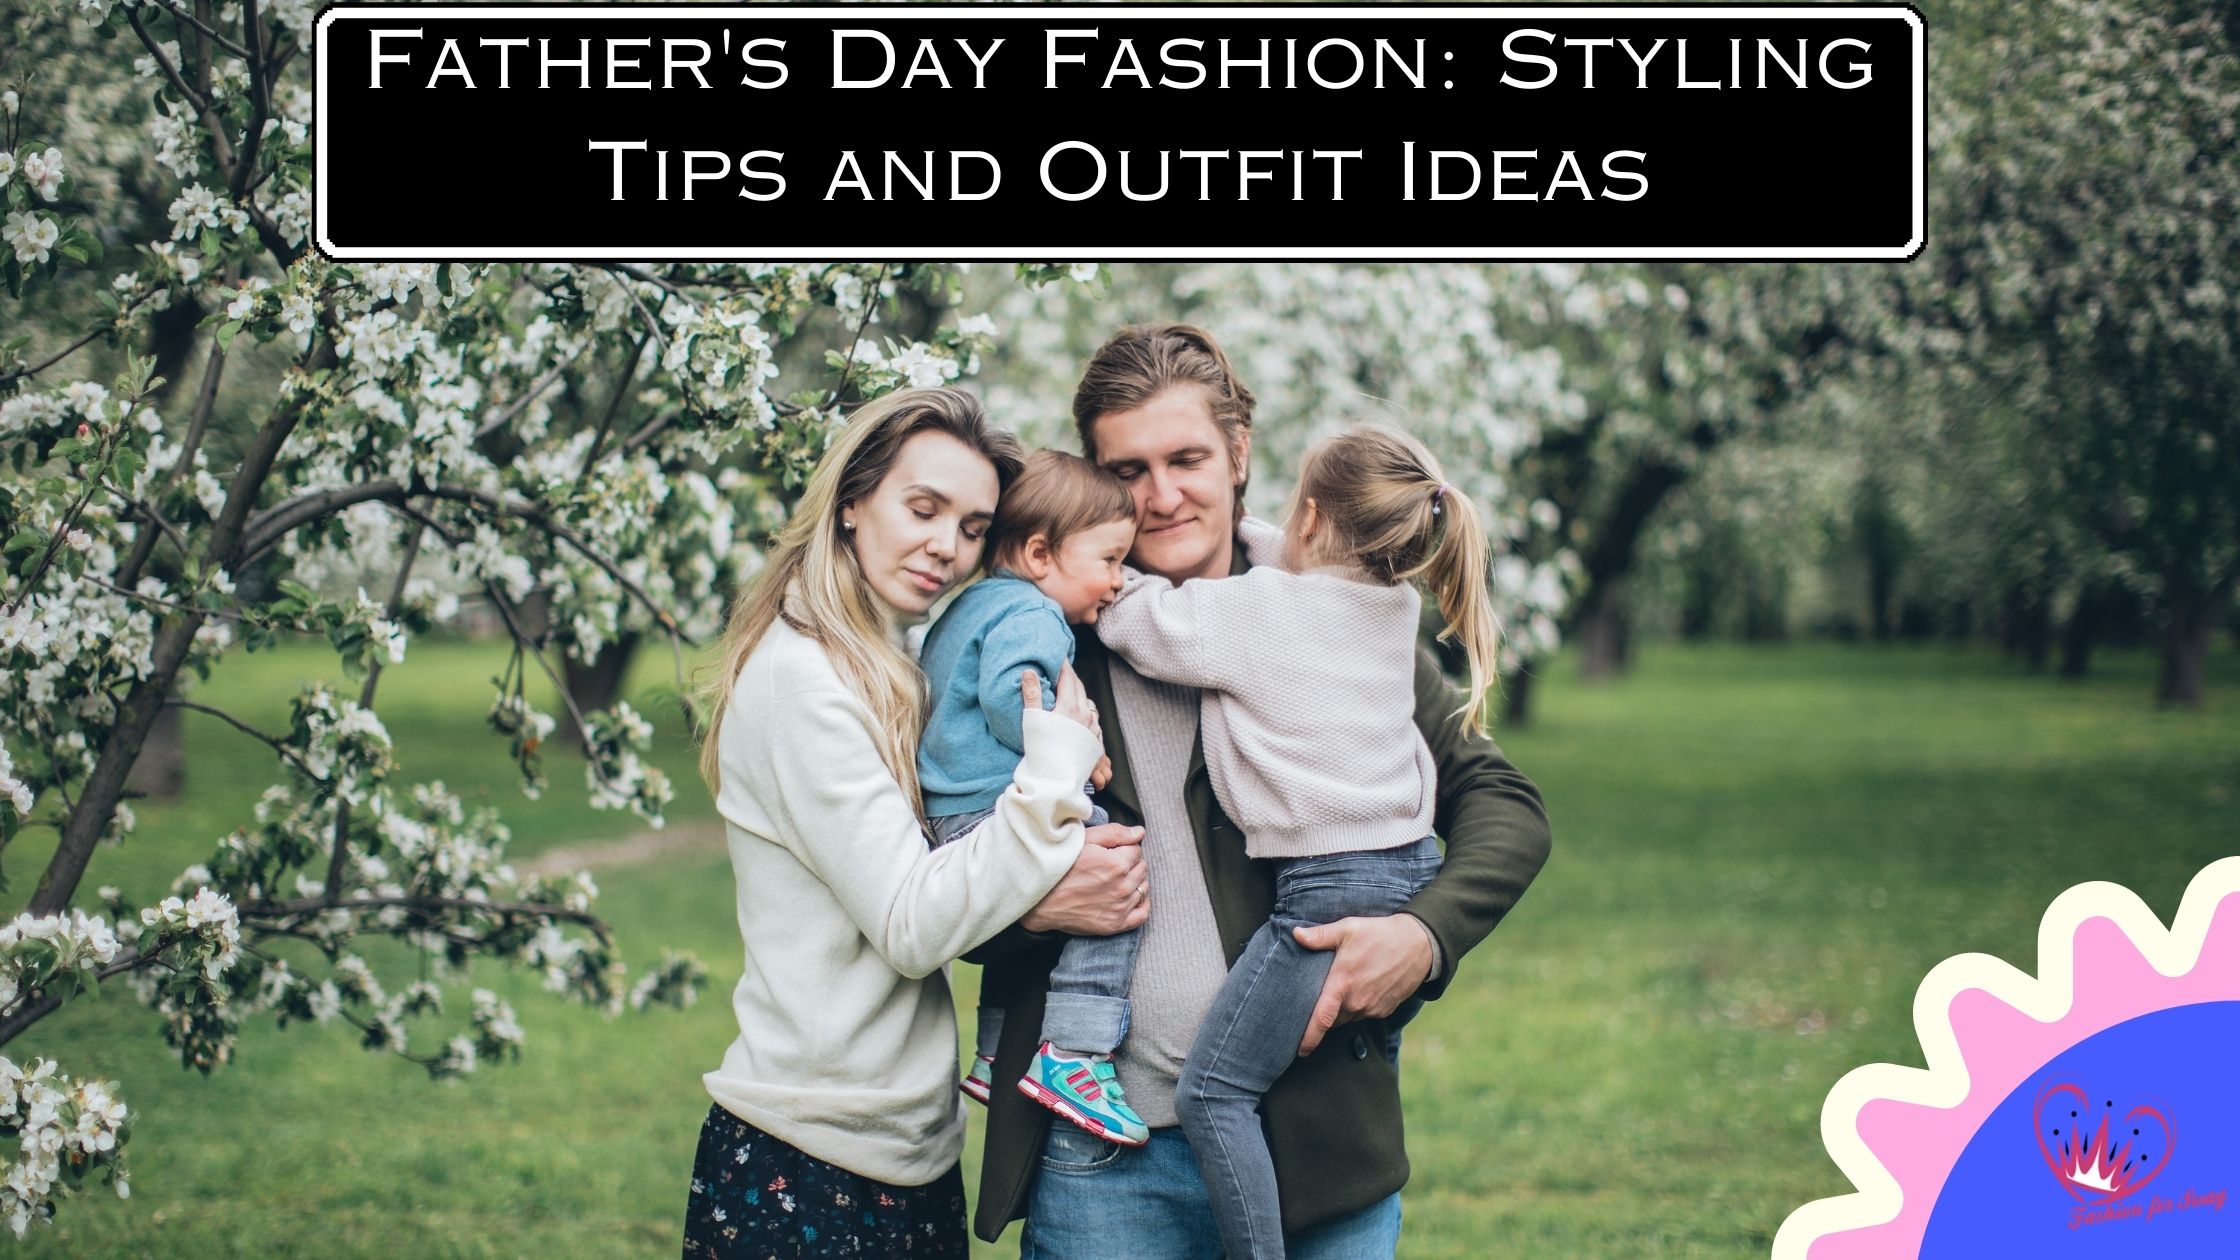 Father’s Day Fashion: Styling Tips and Outfit Ideas